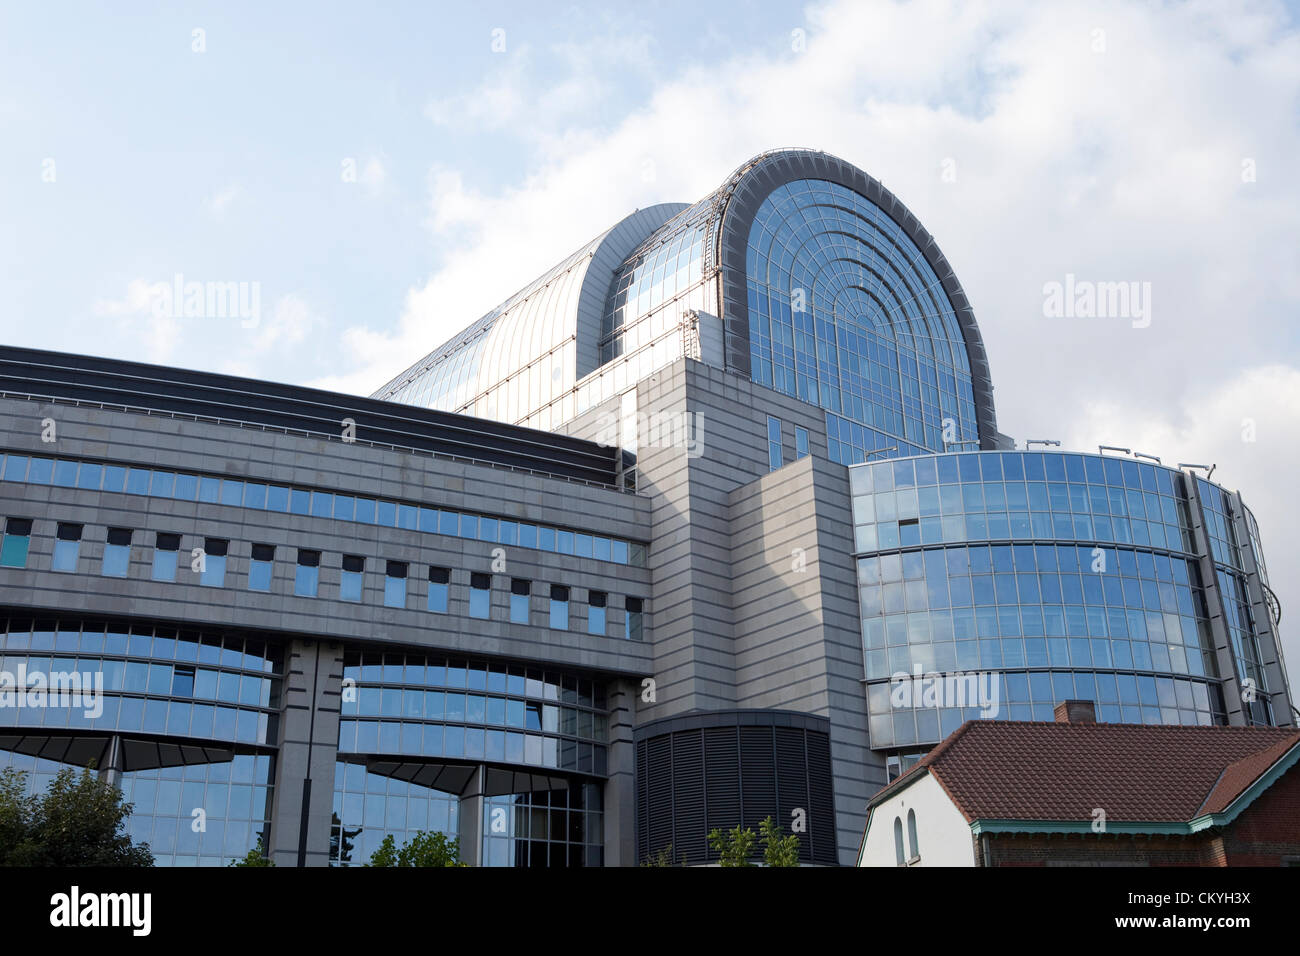 3 Sep 2012 - Brussels (Belgium) - Illustration picture shows the PHS building of the headquarters of the European Parliament in Brussels. Today a part of this building, including the debating chamber, has been closed, due to cracks on the wooden beams carrying the roof. © BERNAL REVERT Stock Photo